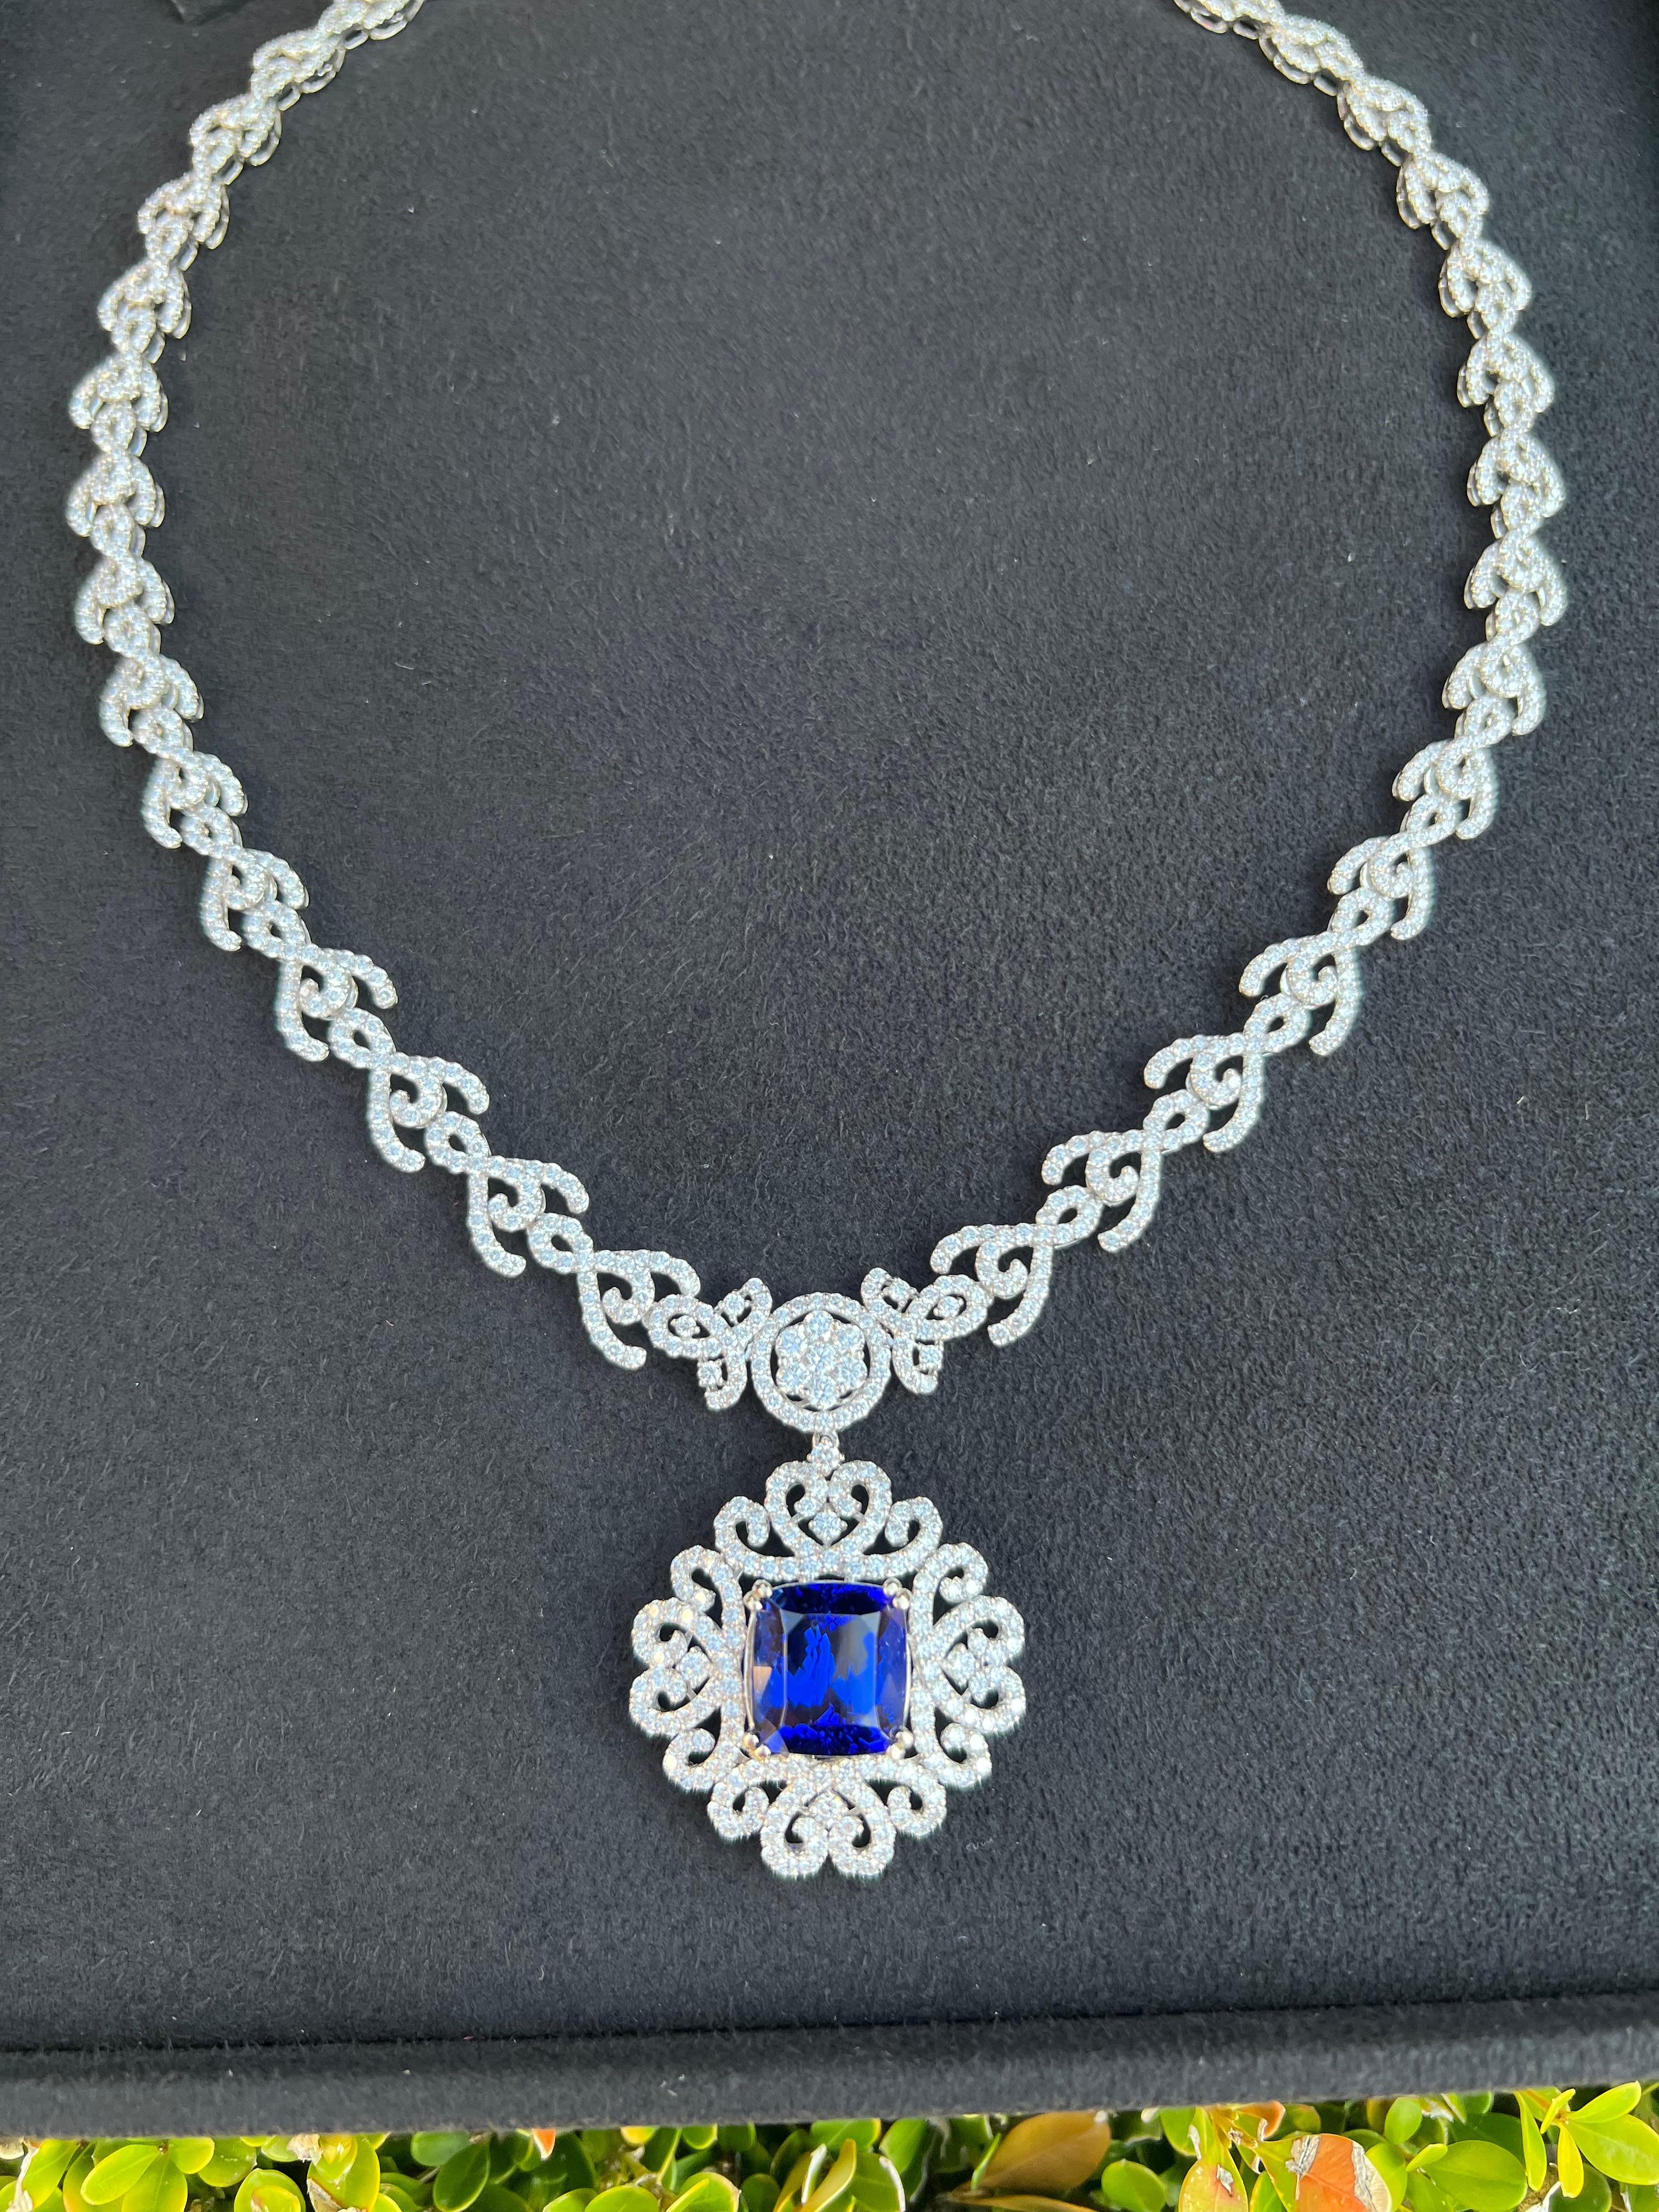 Magnificent, very dazzling and opulent in real life, intense blue color with a hint of violet AAAA grade cushion cut tanzanite and diamond necklace is talon prong set in 18 karat white gold and has a combined total carat weight of approximately